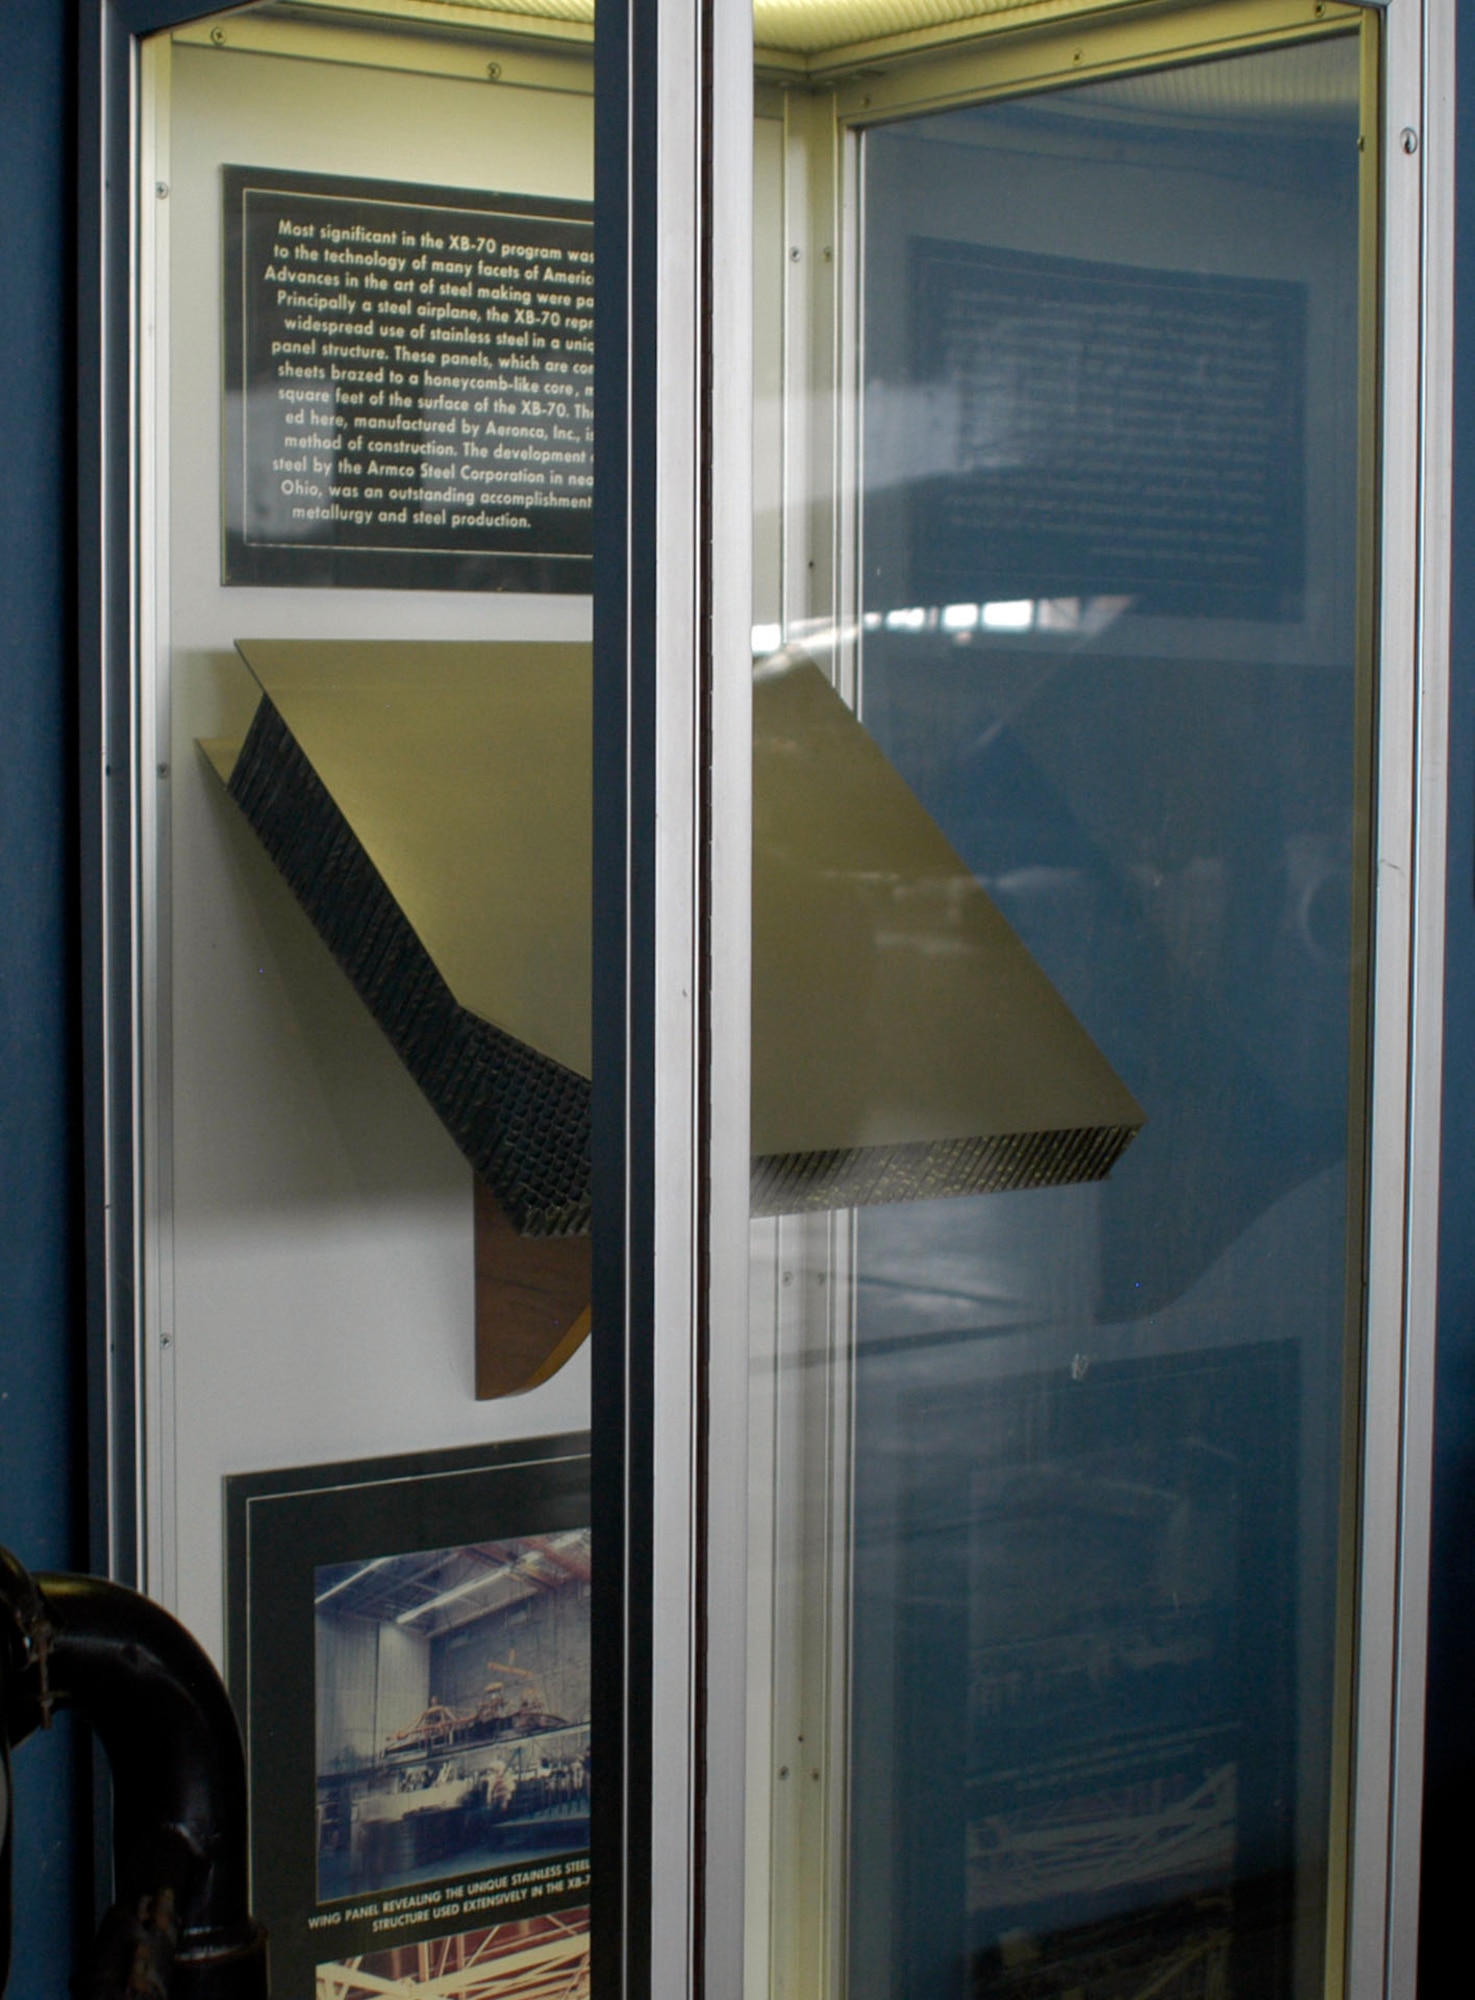 DAYTON, Ohio - A sample of the honeycomb-like stainless steel panel structure from the XB-70 on display in the Research & Development Gallery at the National Museum of the U.S. Air Force. (U.S. Air Force photo)